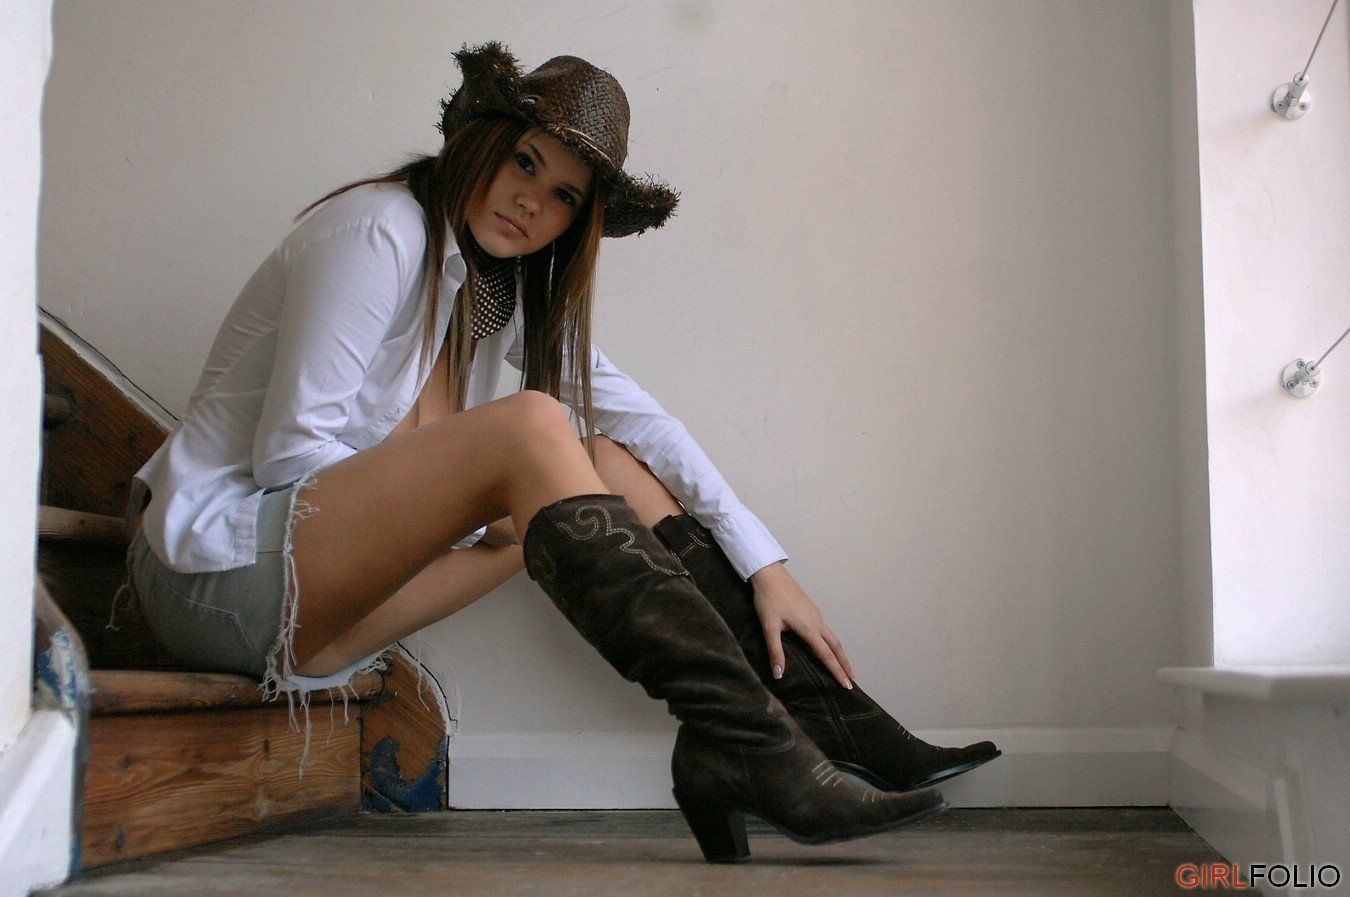 Pretty teen girl wearing boots and white socks.